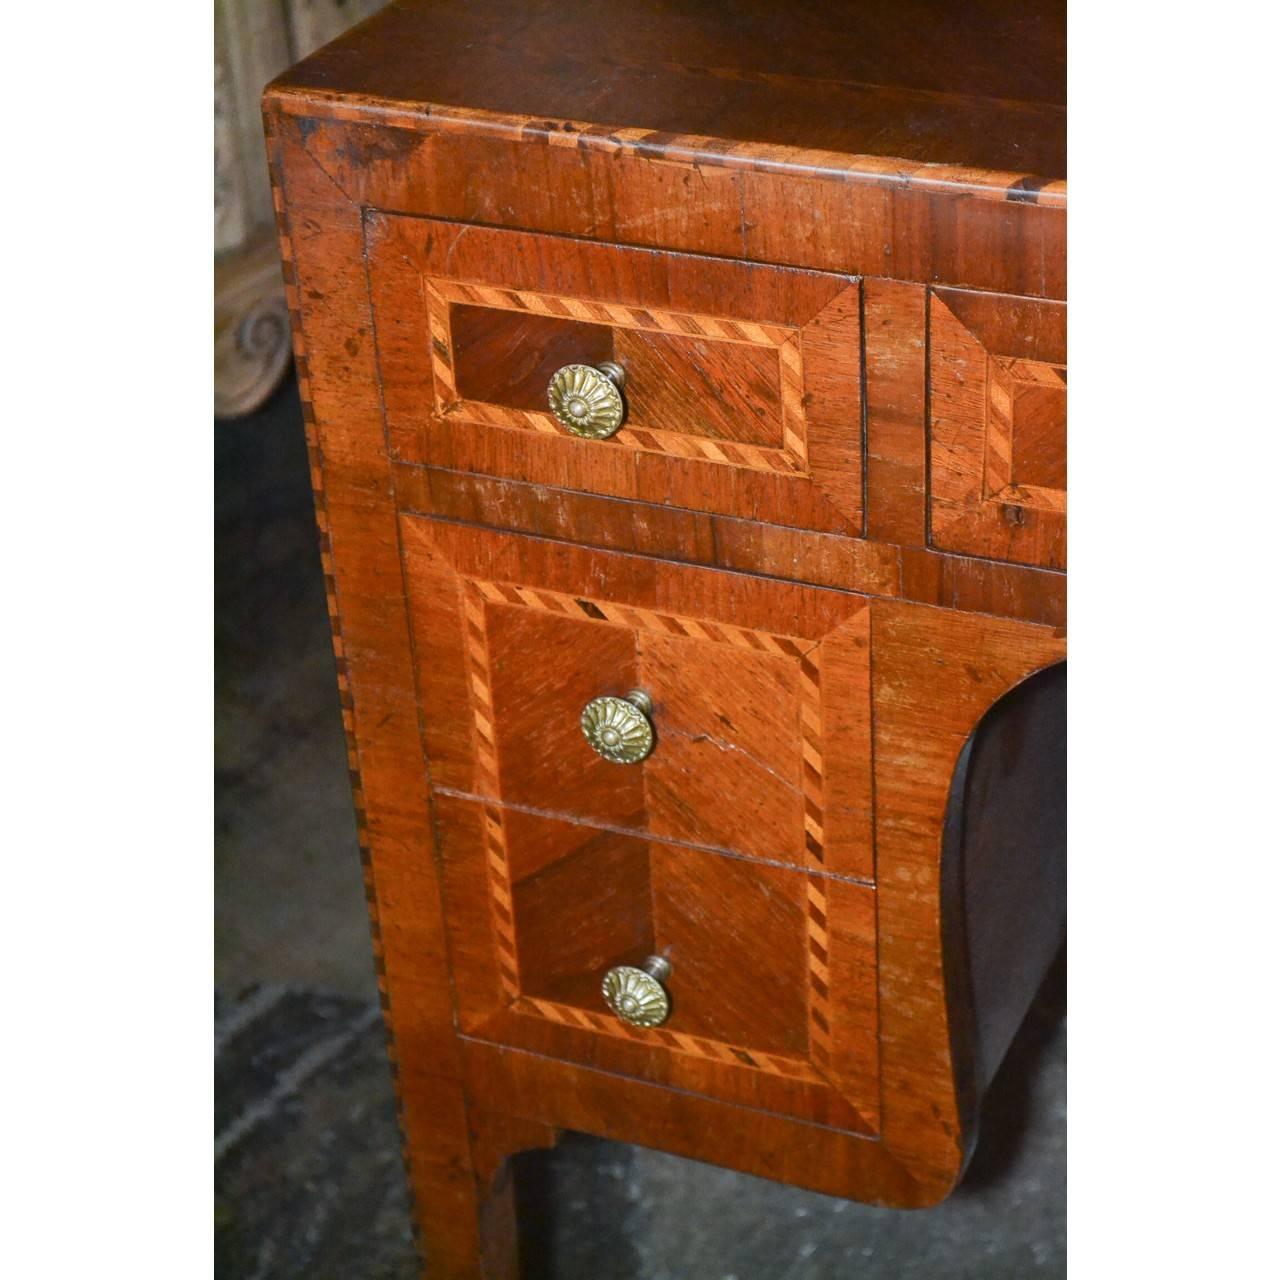 Absolutely gorgeous 19th century Italian mahogany, kingwood, and rosewood vanity or desk with superb parquetry inlays and matching veneers. Nicely contoured knee-hole and inset with seven drawers. Finished in the round with a delicately